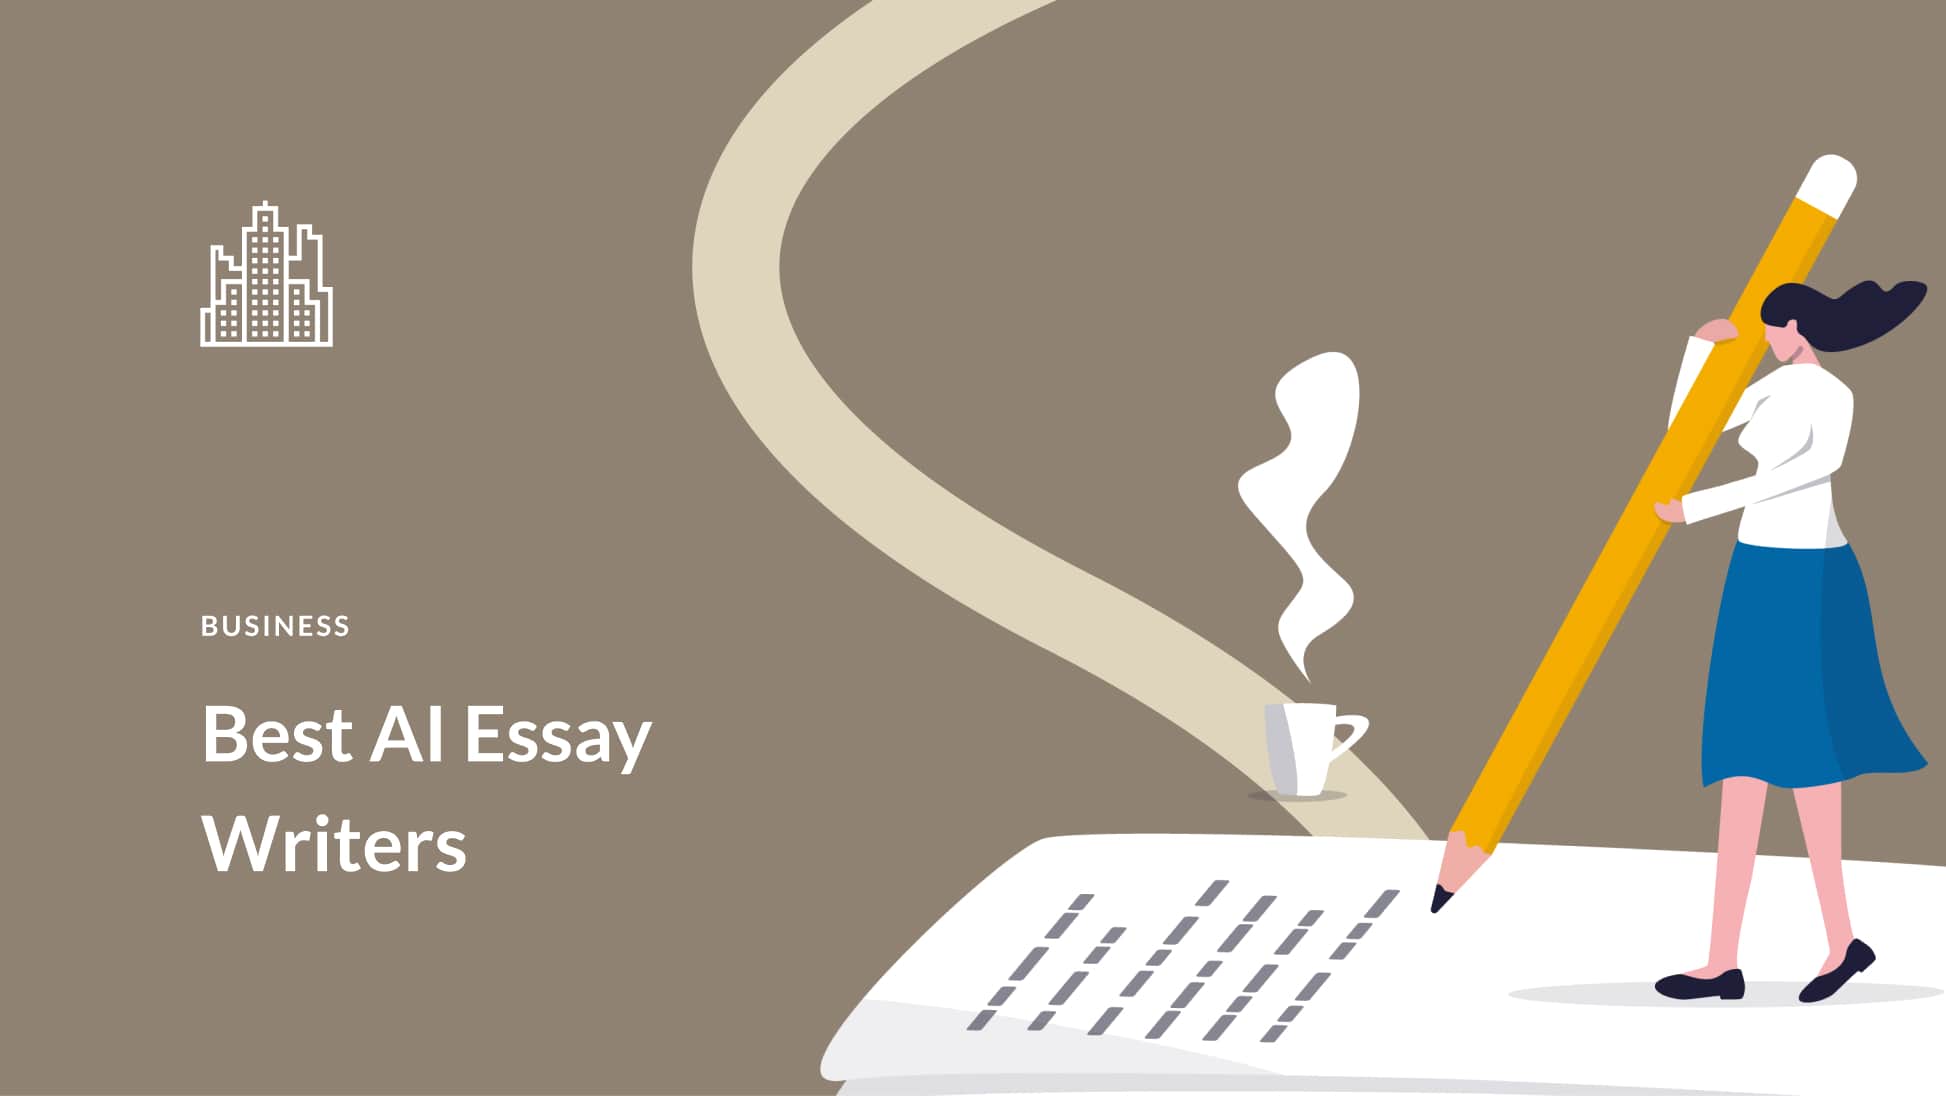 Are You Struggling With Order Cheap Essay Online? Let's Chat